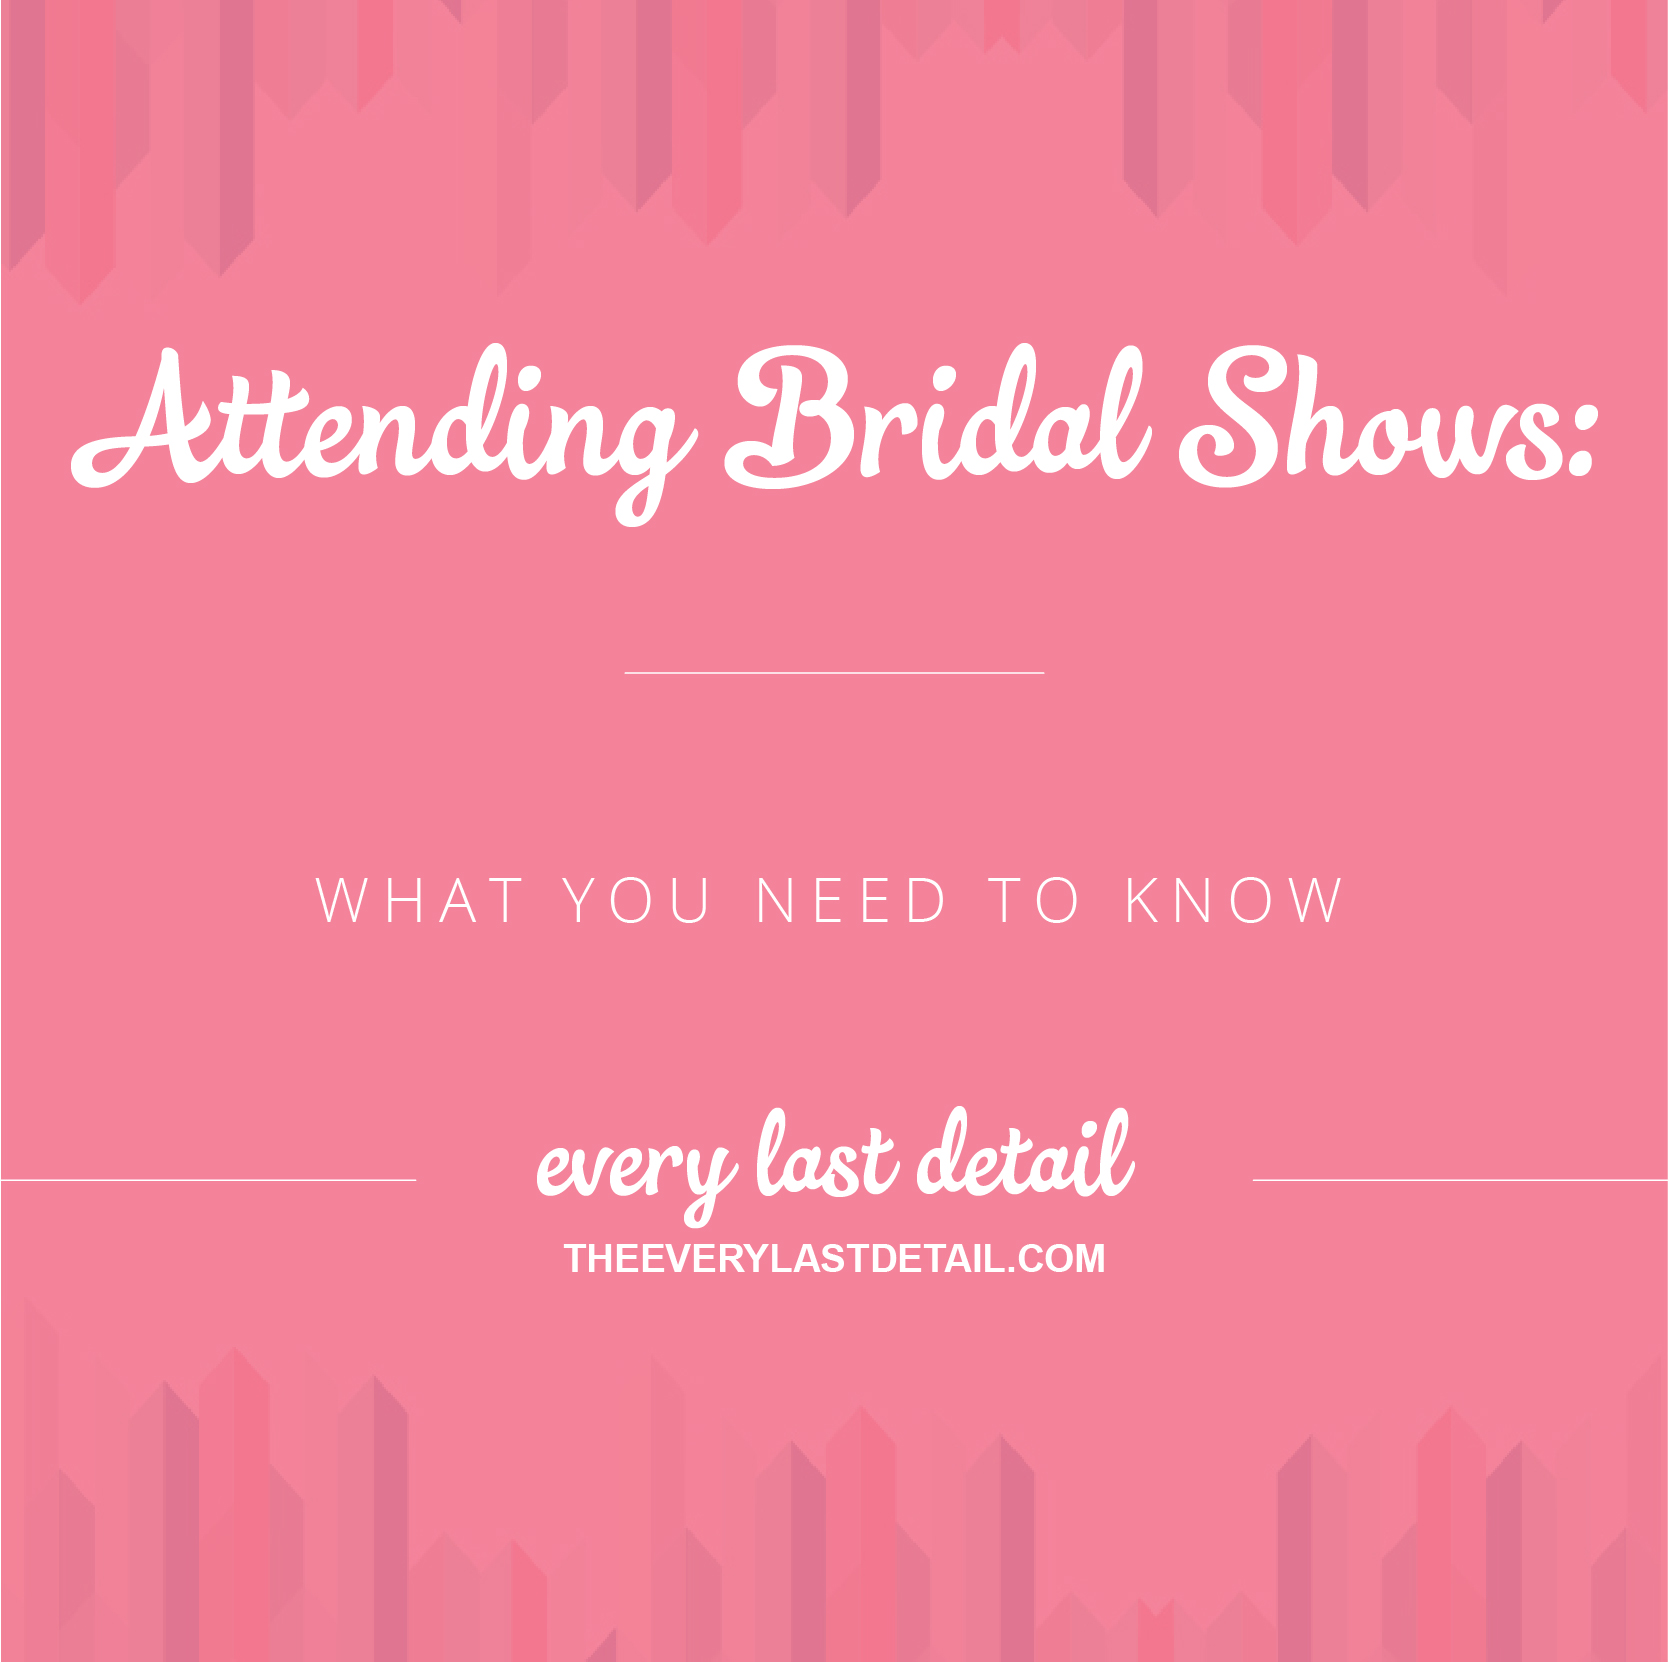 Attending Bridal Shows: What You Need To Know via TheELD.com